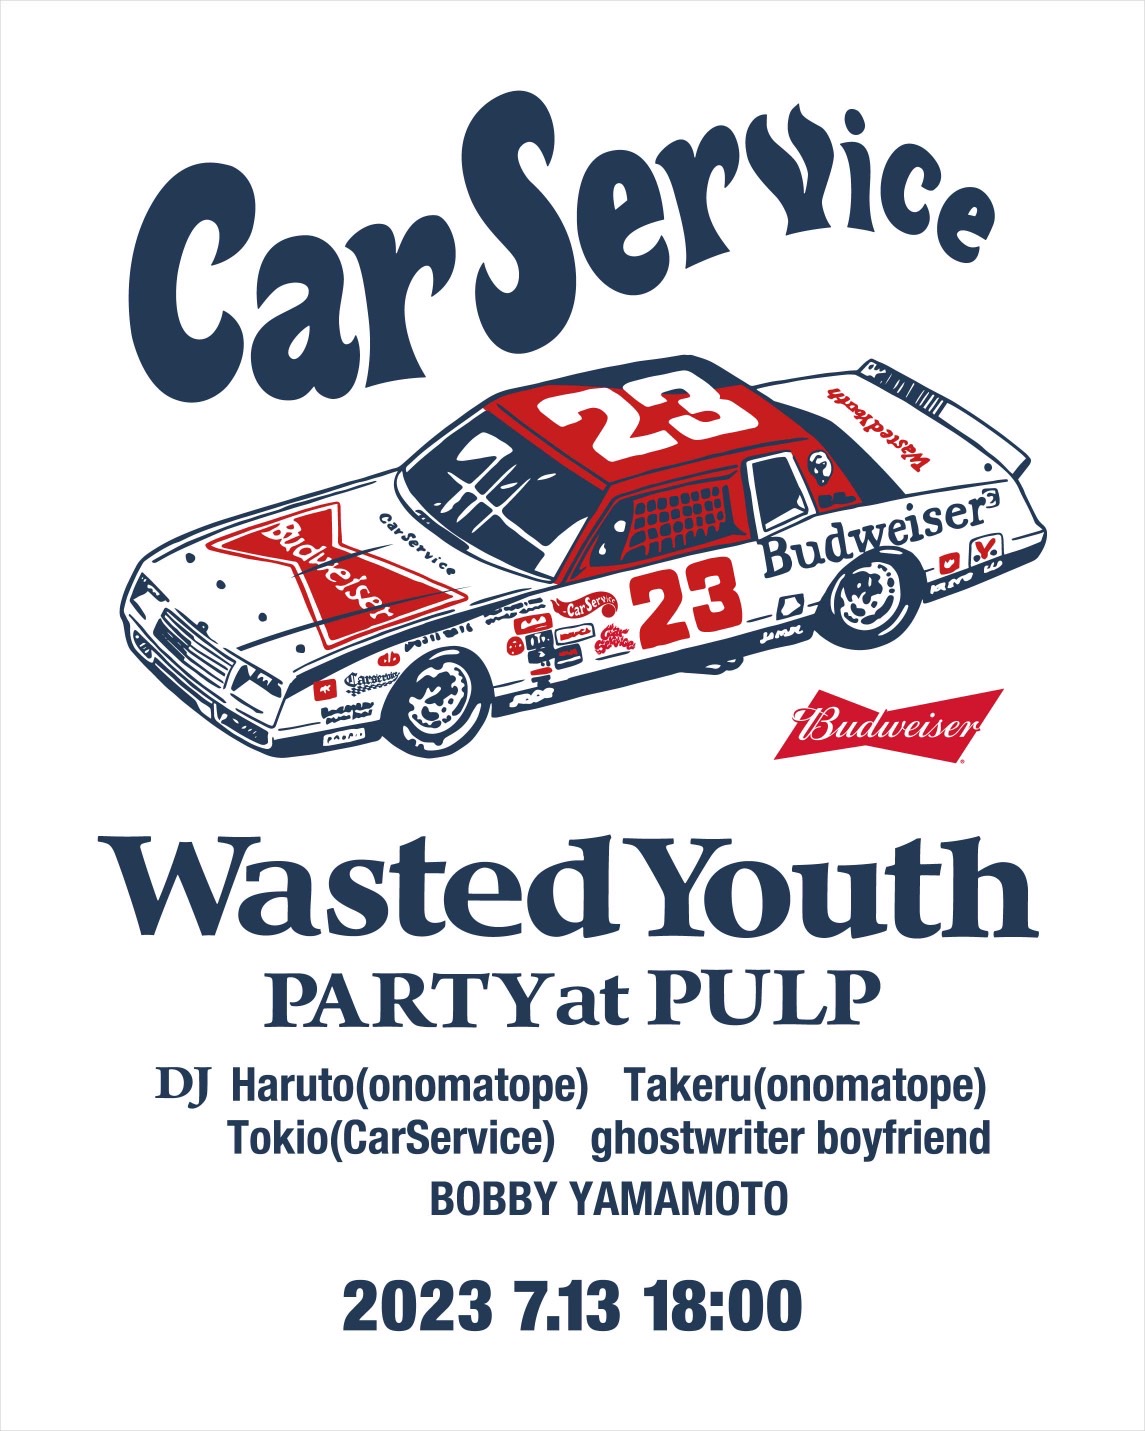 Report: Wasted Youth×Budwiserのフリービアが振舞われたSEE YOU